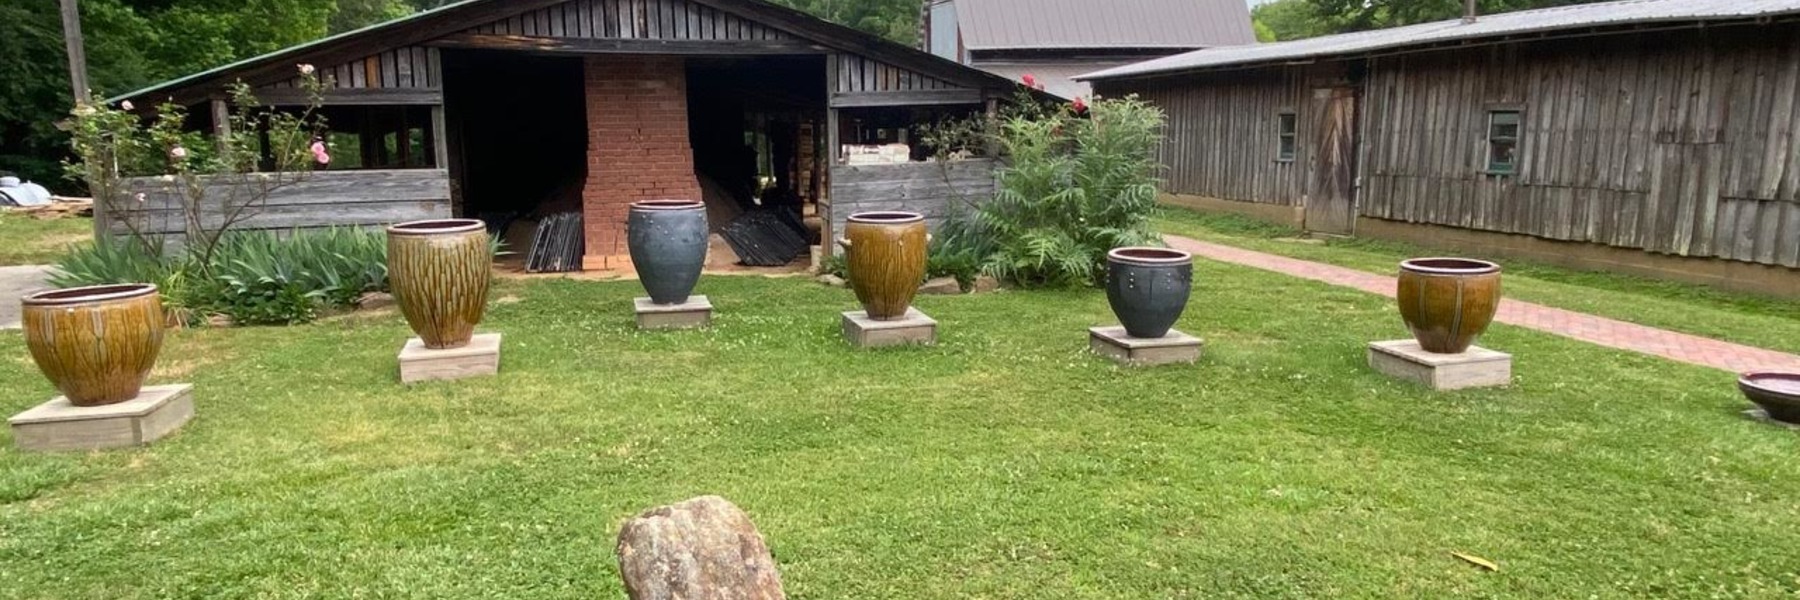 a display of large ceramic pots lined up on a lawn in front of a studio building